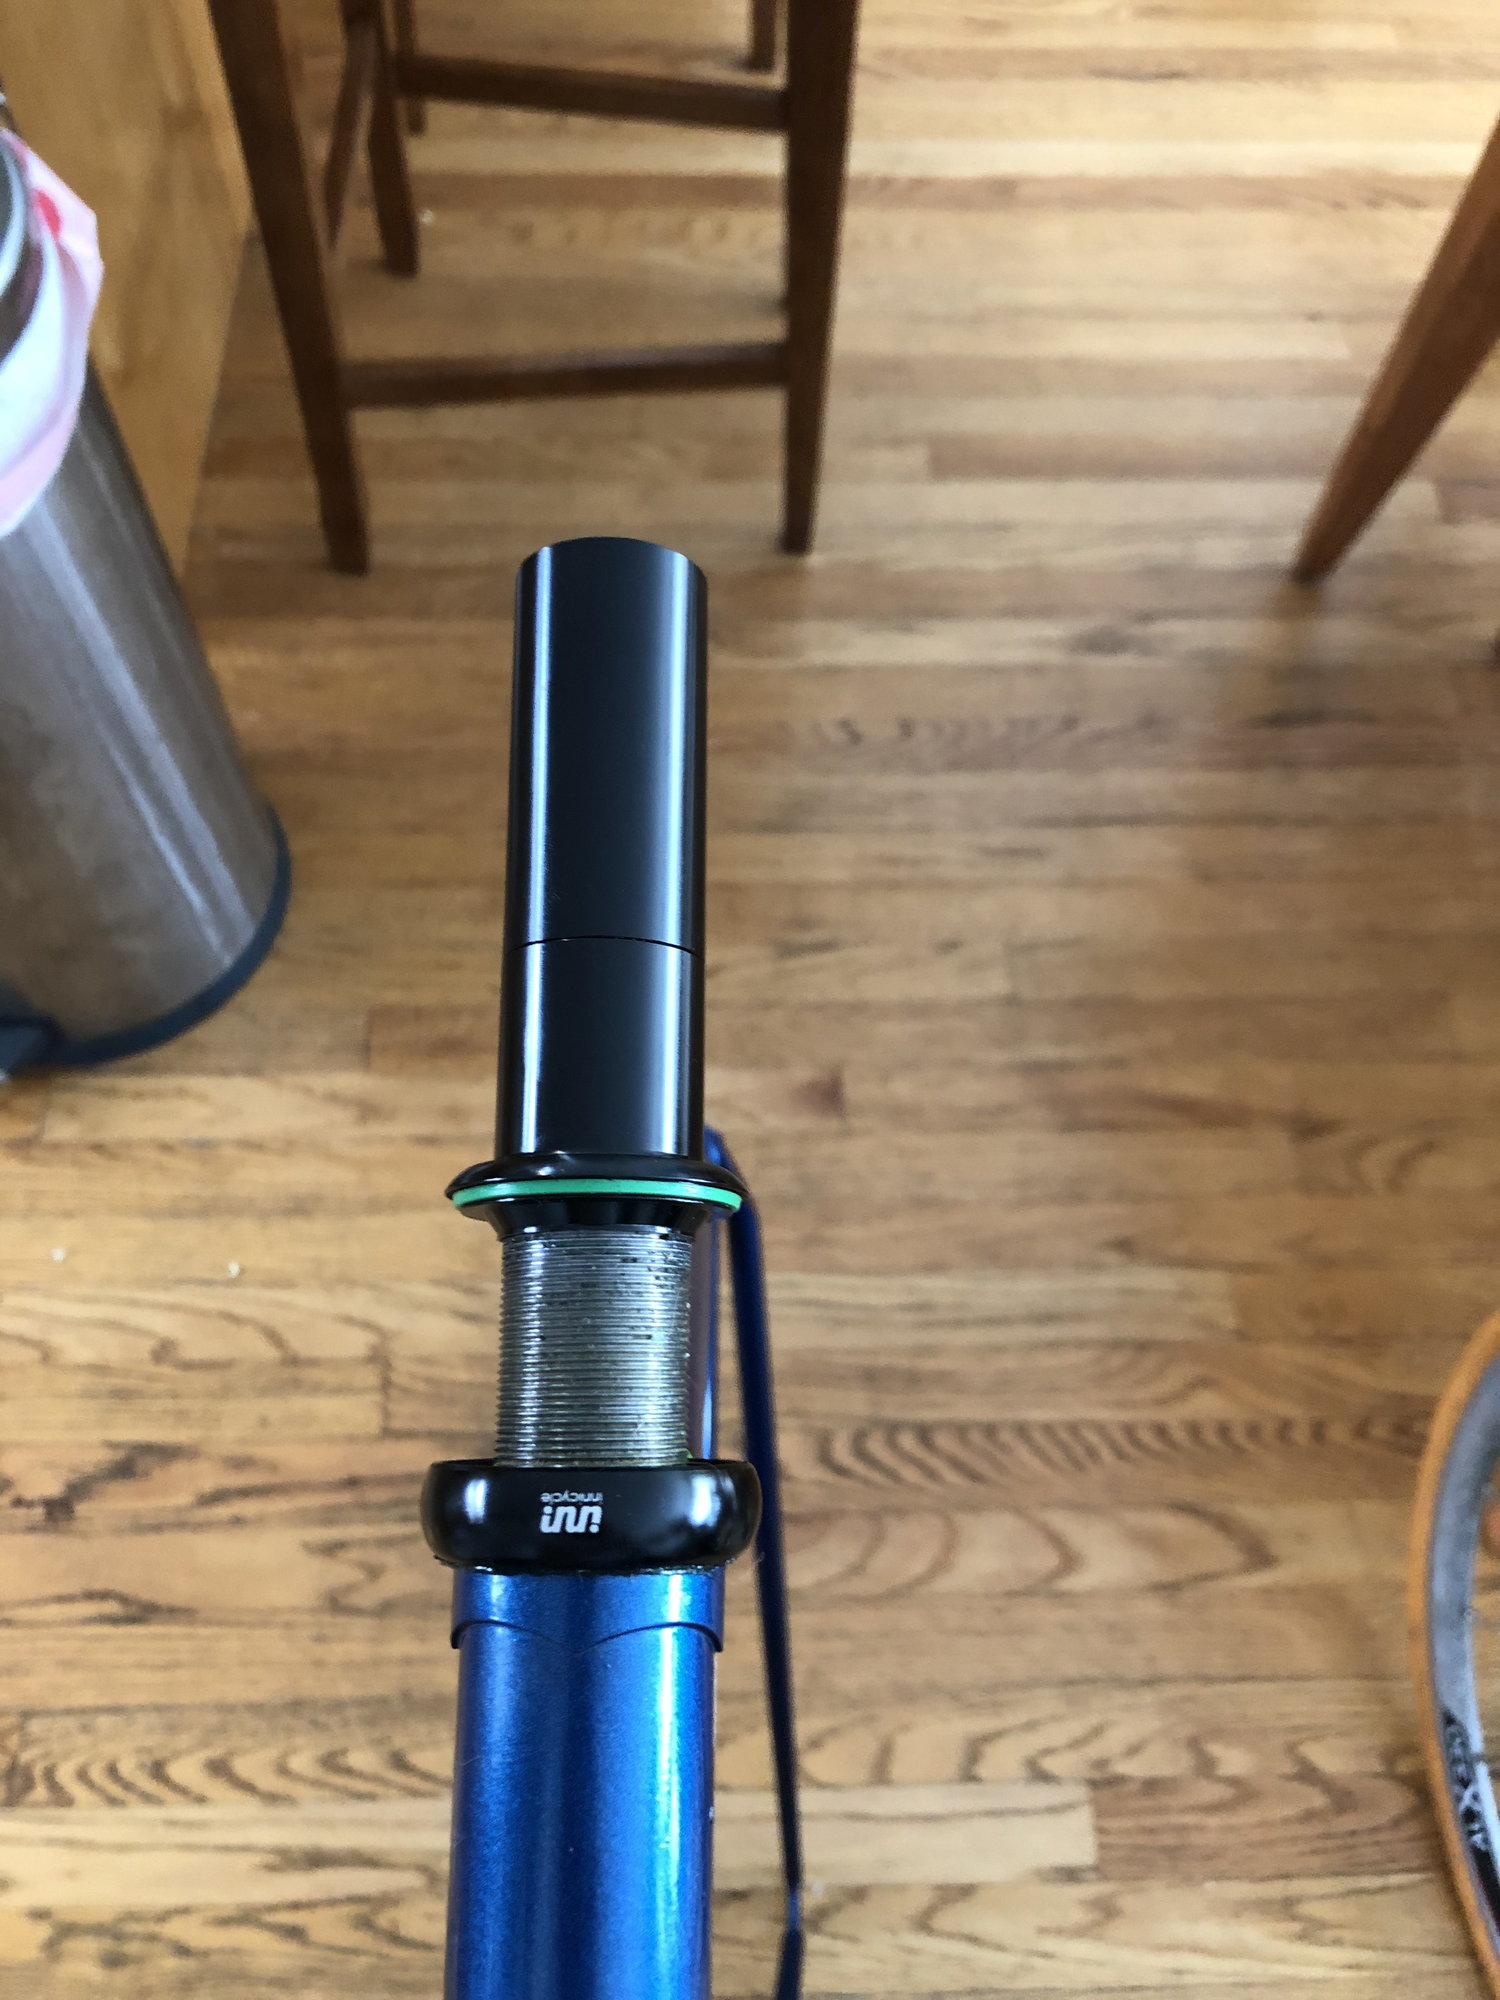 quill stem conversion